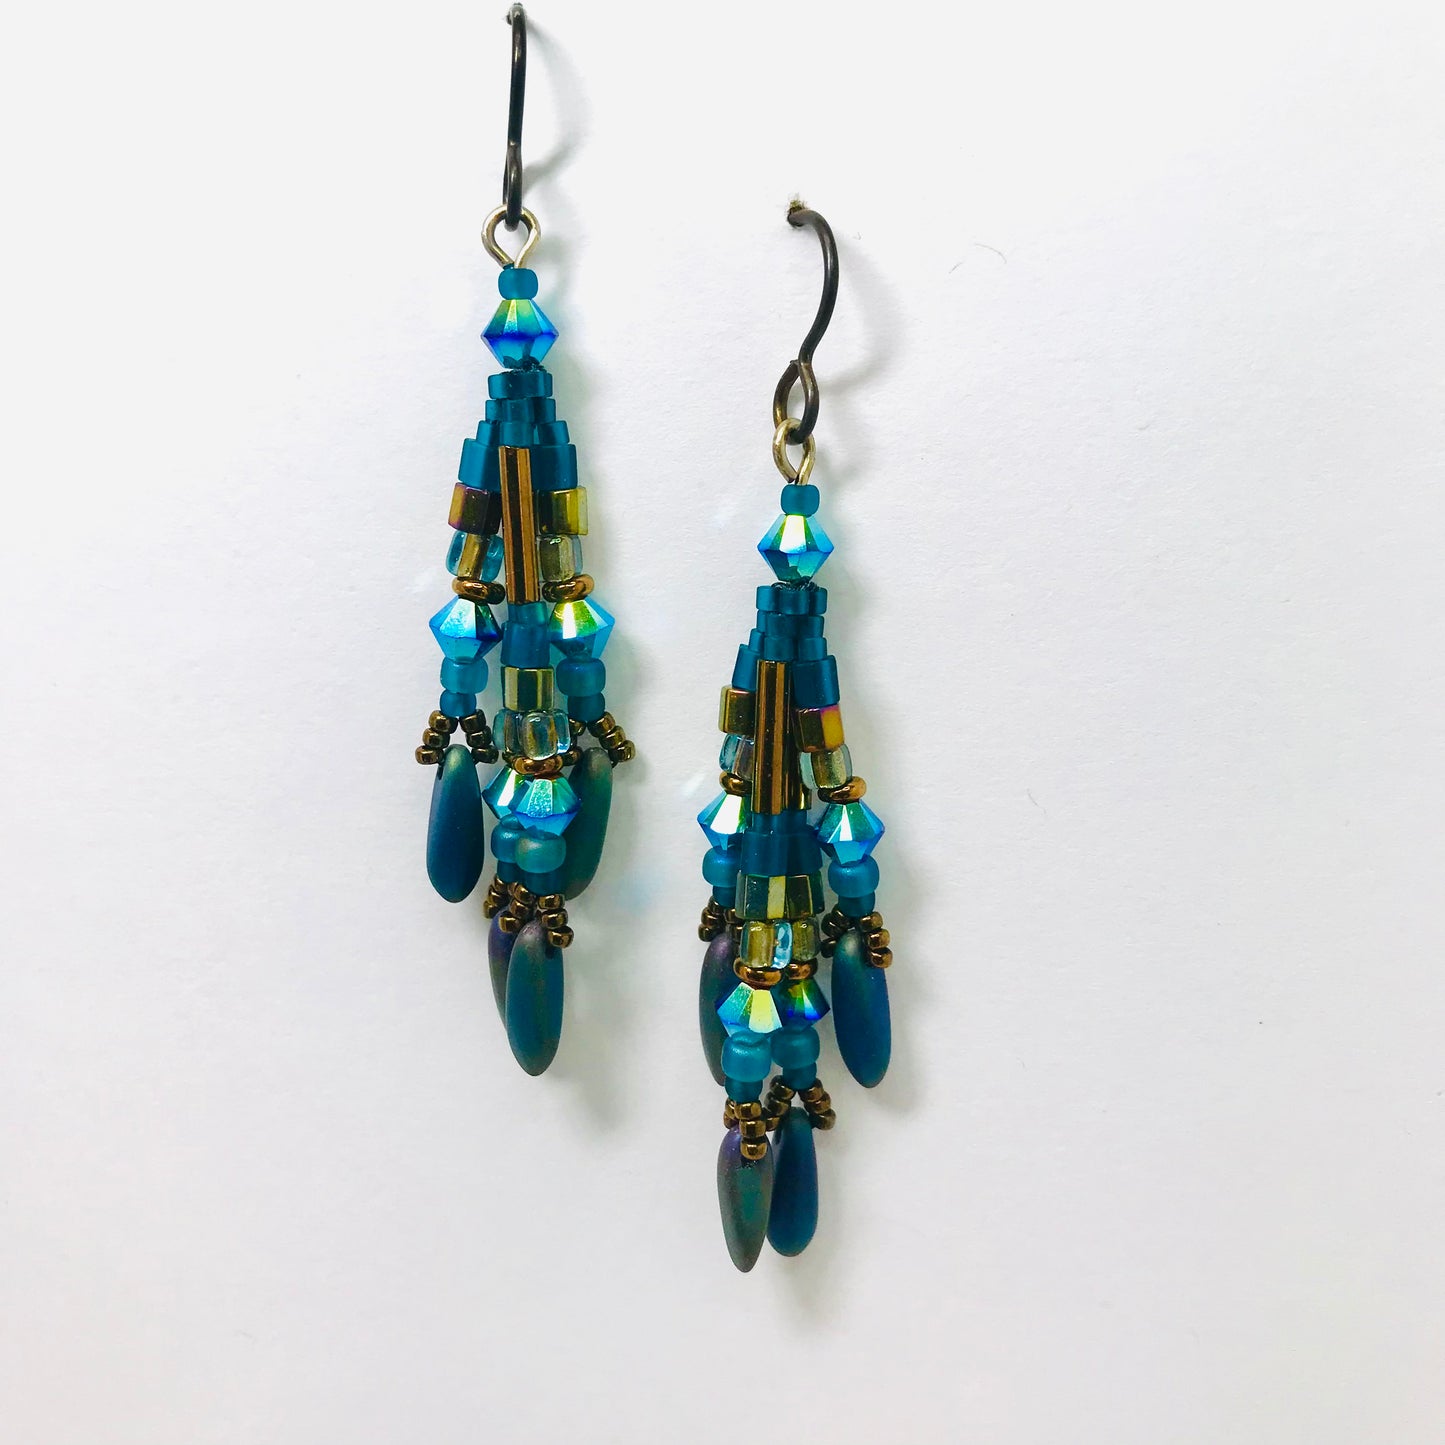 Teal with Aurora Borealis Fringy Earrings